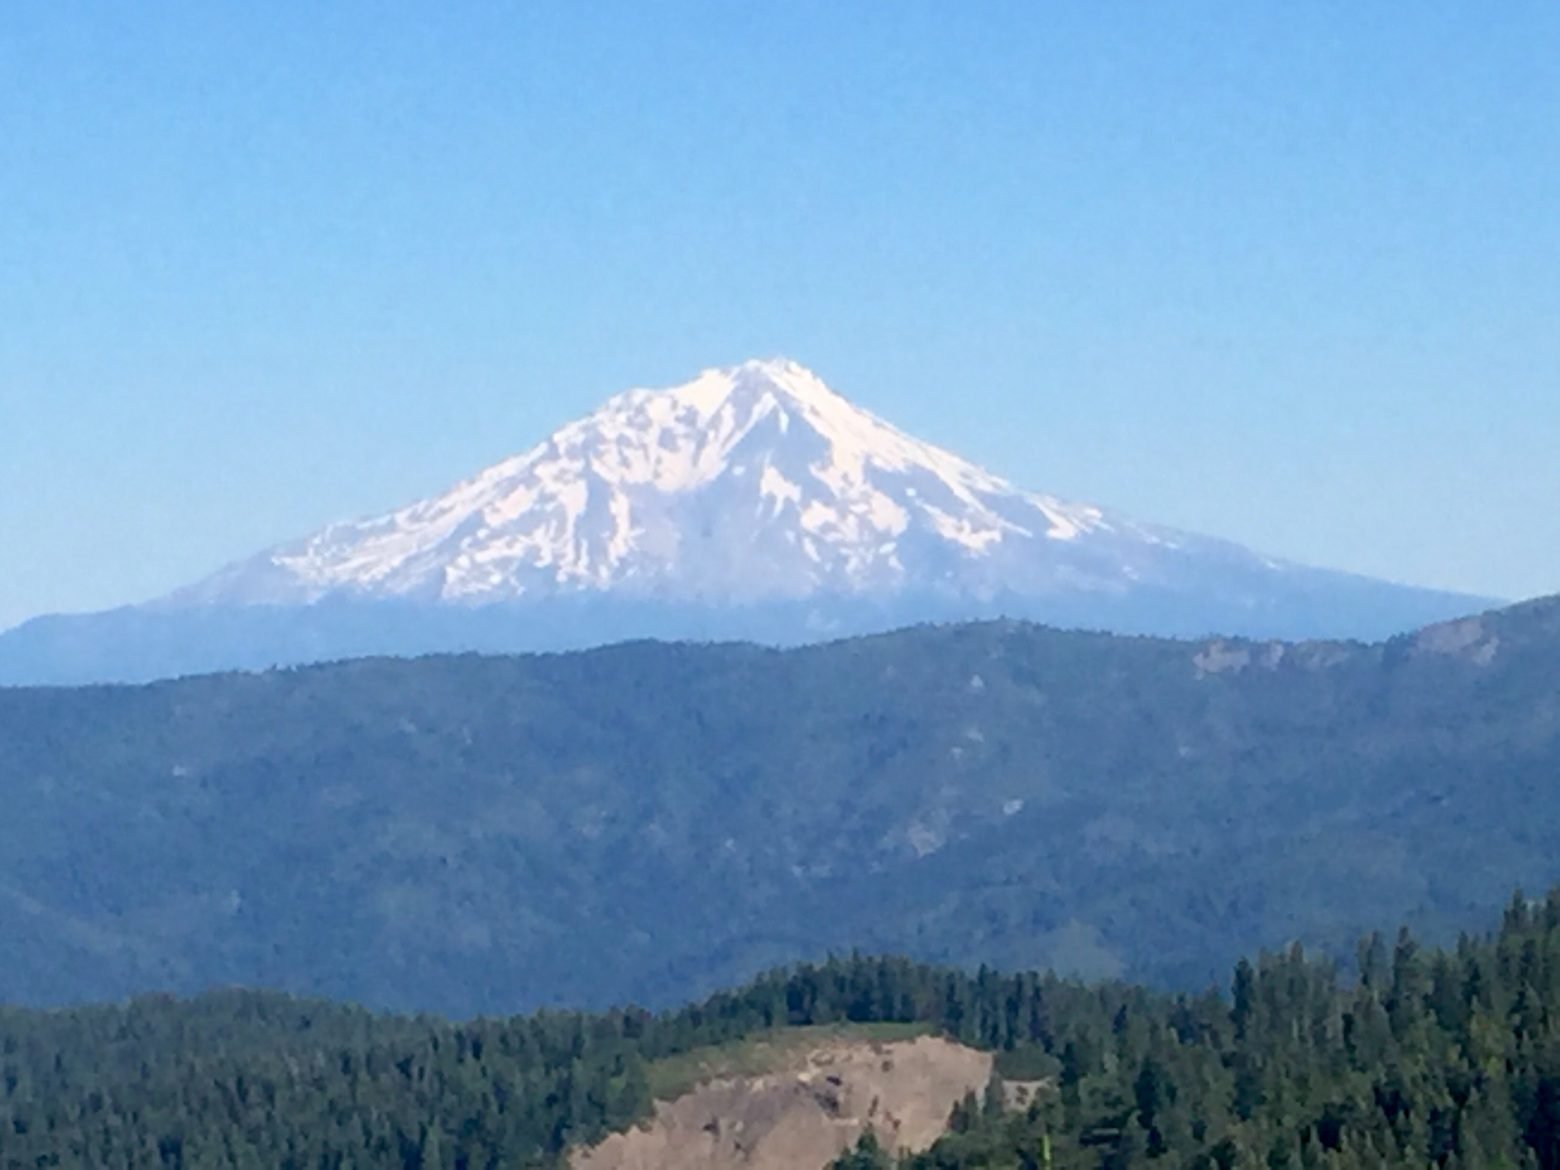 View of a snow-capped Mount Shasta